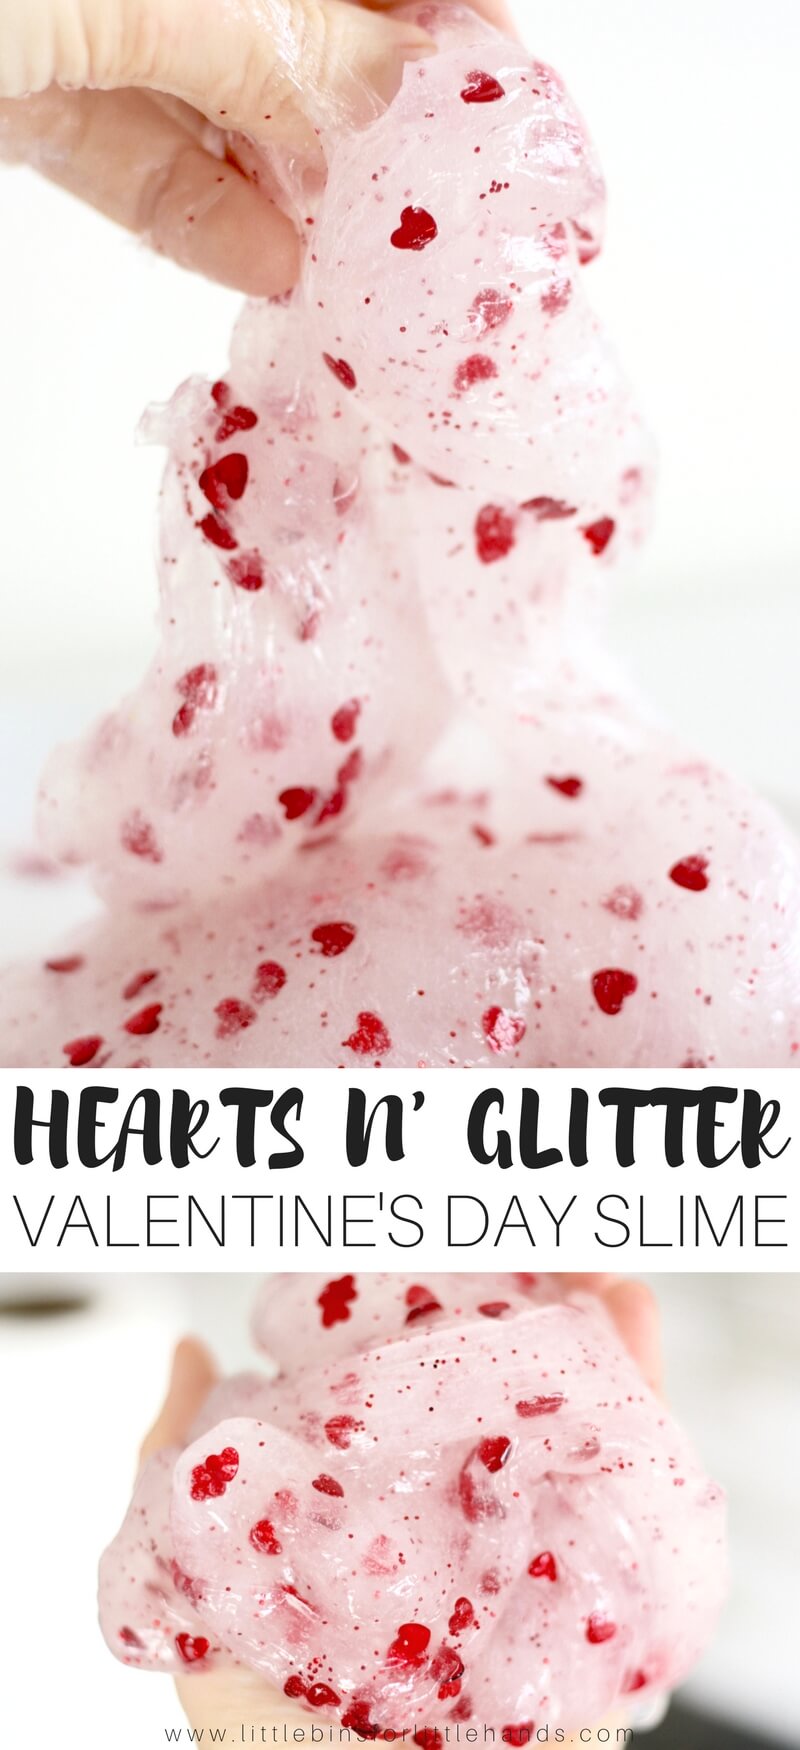 Best easy Valentines Day heart slime ever! Nothing says Valentine's Day like slime. If this is your first time stopping by our site, you will see how much we love making slime. If you have seen our slime ideas before, you know that we just had to share a Valentines Day Heart Slime with you and your kids. Slime is cool science and play all rolled into one simple to make slime recipe.